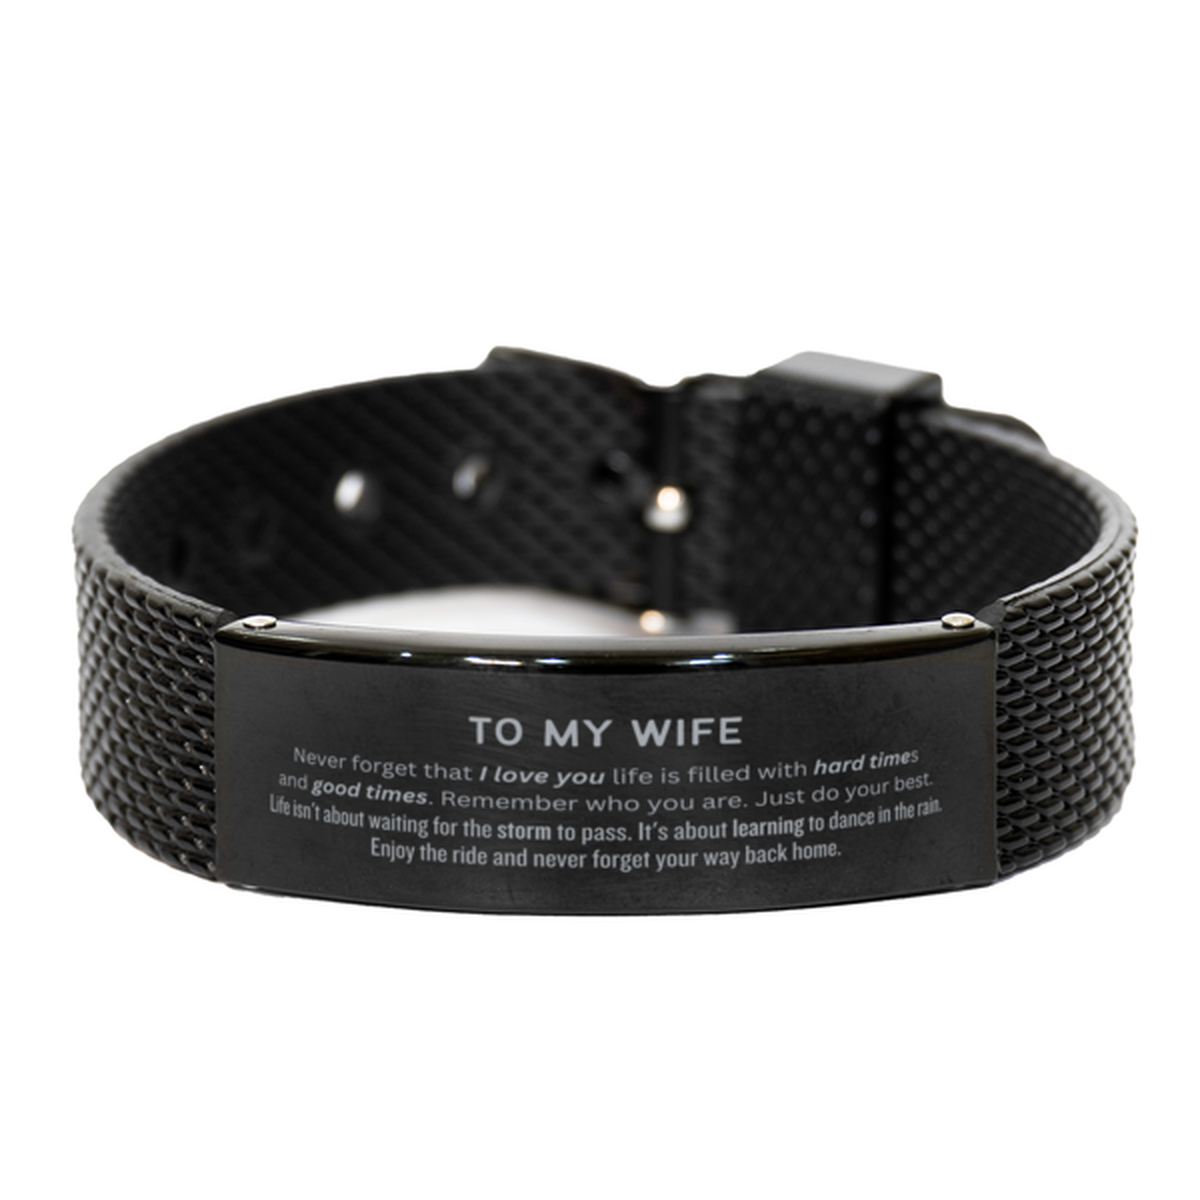 Christmas Wife Black Shark Mesh Bracelet Gifts, To My Wife Birthday Thank You Gifts For Wife, Graduation Unique Gifts For Wife To My Wife Never forget that I love you life is filled with hard times and good times. Remember who you are. Just do your best